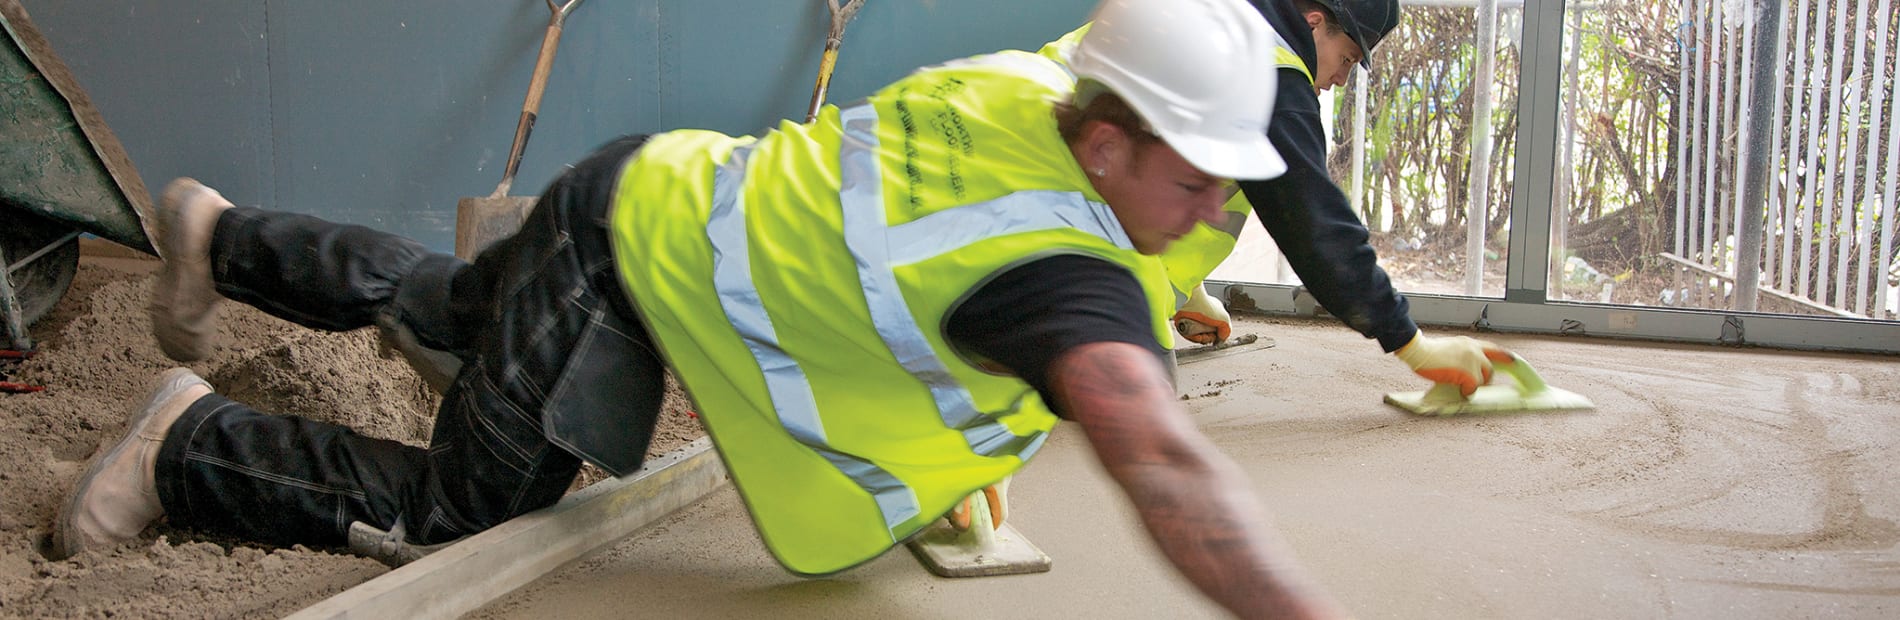 screed being used on a floor